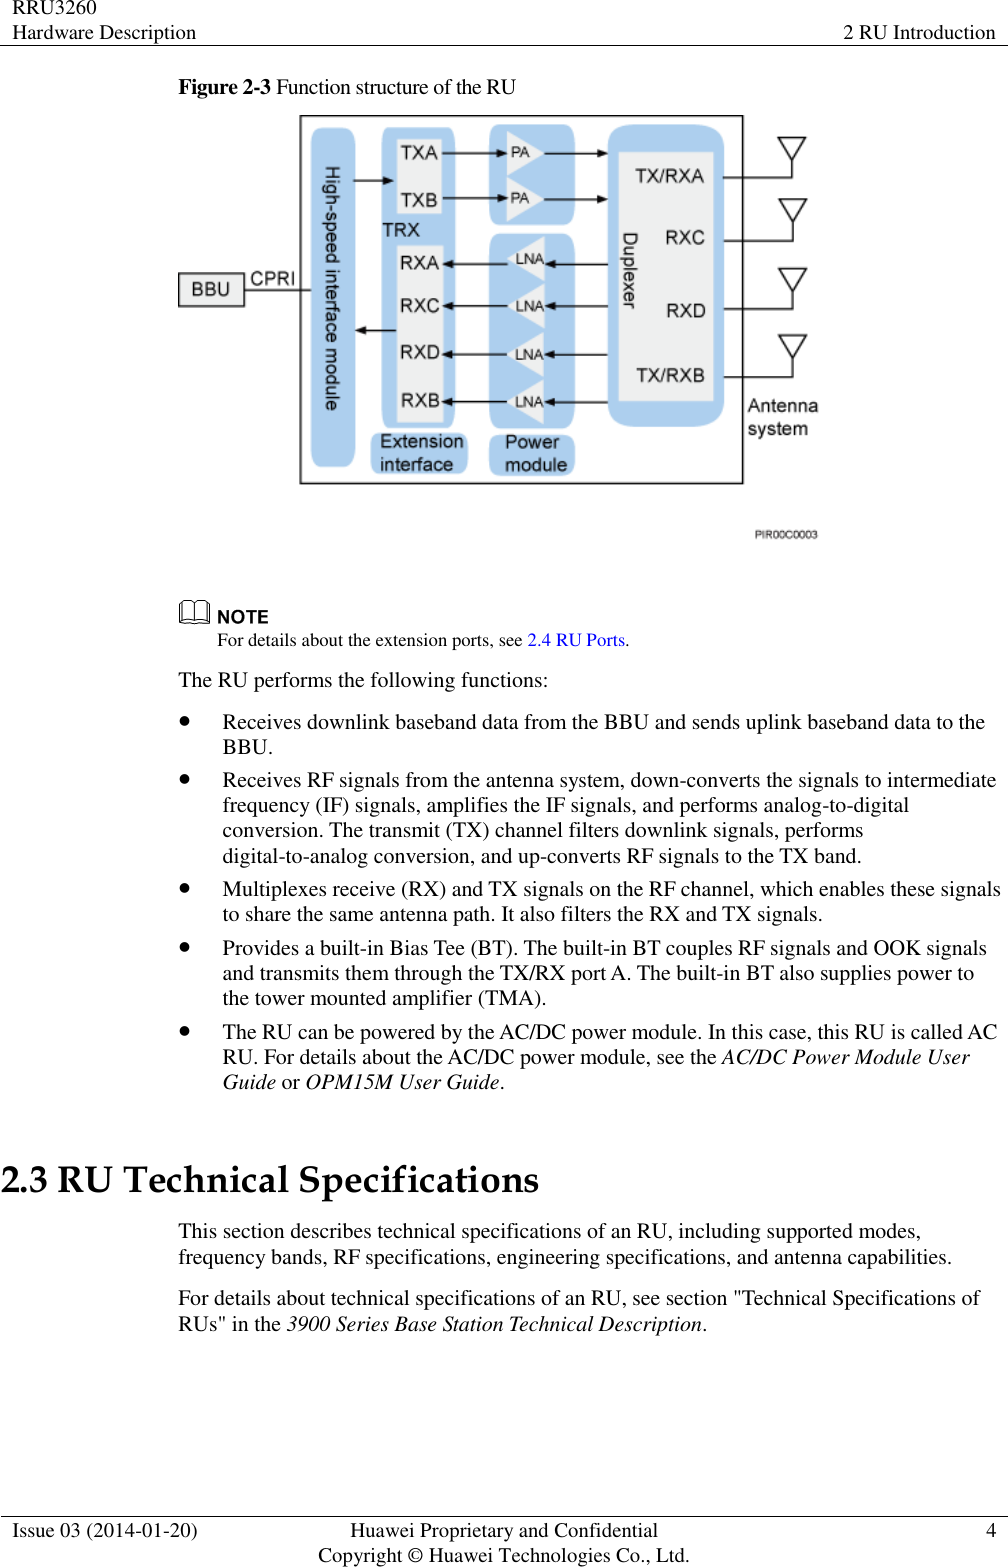 RRU3260 Hardware Description 2 RU Introduction  Issue 03 (2014-01-20) Huawei Proprietary and Confidential                                     Copyright © Huawei Technologies Co., Ltd. 4  Figure 2-3 Function structure of the RU    For details about the extension ports, see 2.4 RU Ports. The RU performs the following functions:  Receives downlink baseband data from the BBU and sends uplink baseband data to the BBU.  Receives RF signals from the antenna system, down-converts the signals to intermediate frequency (IF) signals, amplifies the IF signals, and performs analog-to-digital conversion. The transmit (TX) channel filters downlink signals, performs digital-to-analog conversion, and up-converts RF signals to the TX band.  Multiplexes receive (RX) and TX signals on the RF channel, which enables these signals to share the same antenna path. It also filters the RX and TX signals.  Provides a built-in Bias Tee (BT). The built-in BT couples RF signals and OOK signals and transmits them through the TX/RX port A. The built-in BT also supplies power to the tower mounted amplifier (TMA).  The RU can be powered by the AC/DC power module. In this case, this RU is called AC RU. For details about the AC/DC power module, see the AC/DC Power Module User Guide or OPM15M User Guide. 2.3 RU Technical Specifications This section describes technical specifications of an RU, including supported modes, frequency bands, RF specifications, engineering specifications, and antenna capabilities. For details about technical specifications of an RU, see section &quot;Technical Specifications of RUs&quot; in the 3900 Series Base Station Technical Description. 